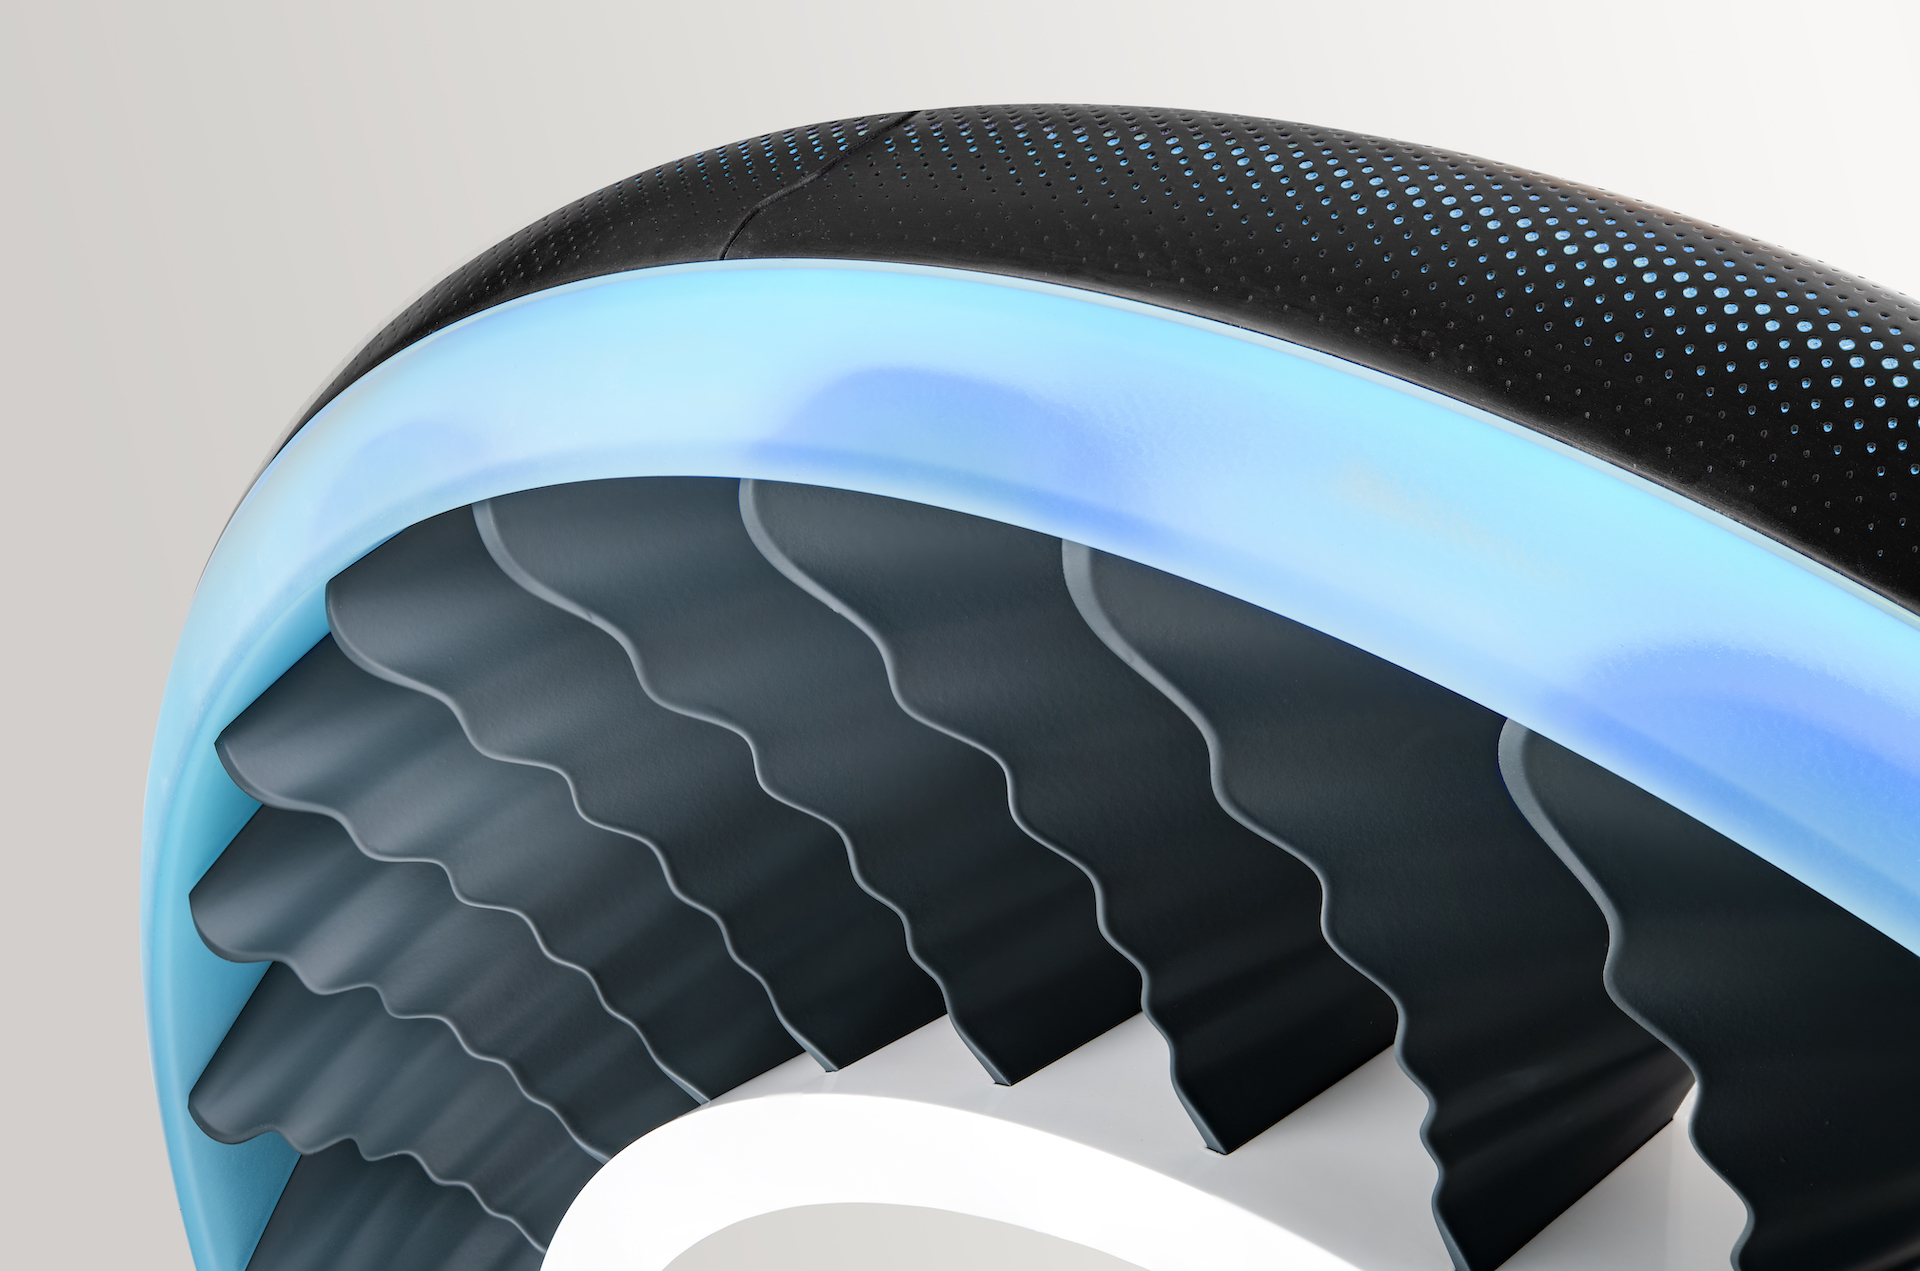 Goodyear, Goodyear concept tires double as propellers for flying cars, ClassicCars.com Journal